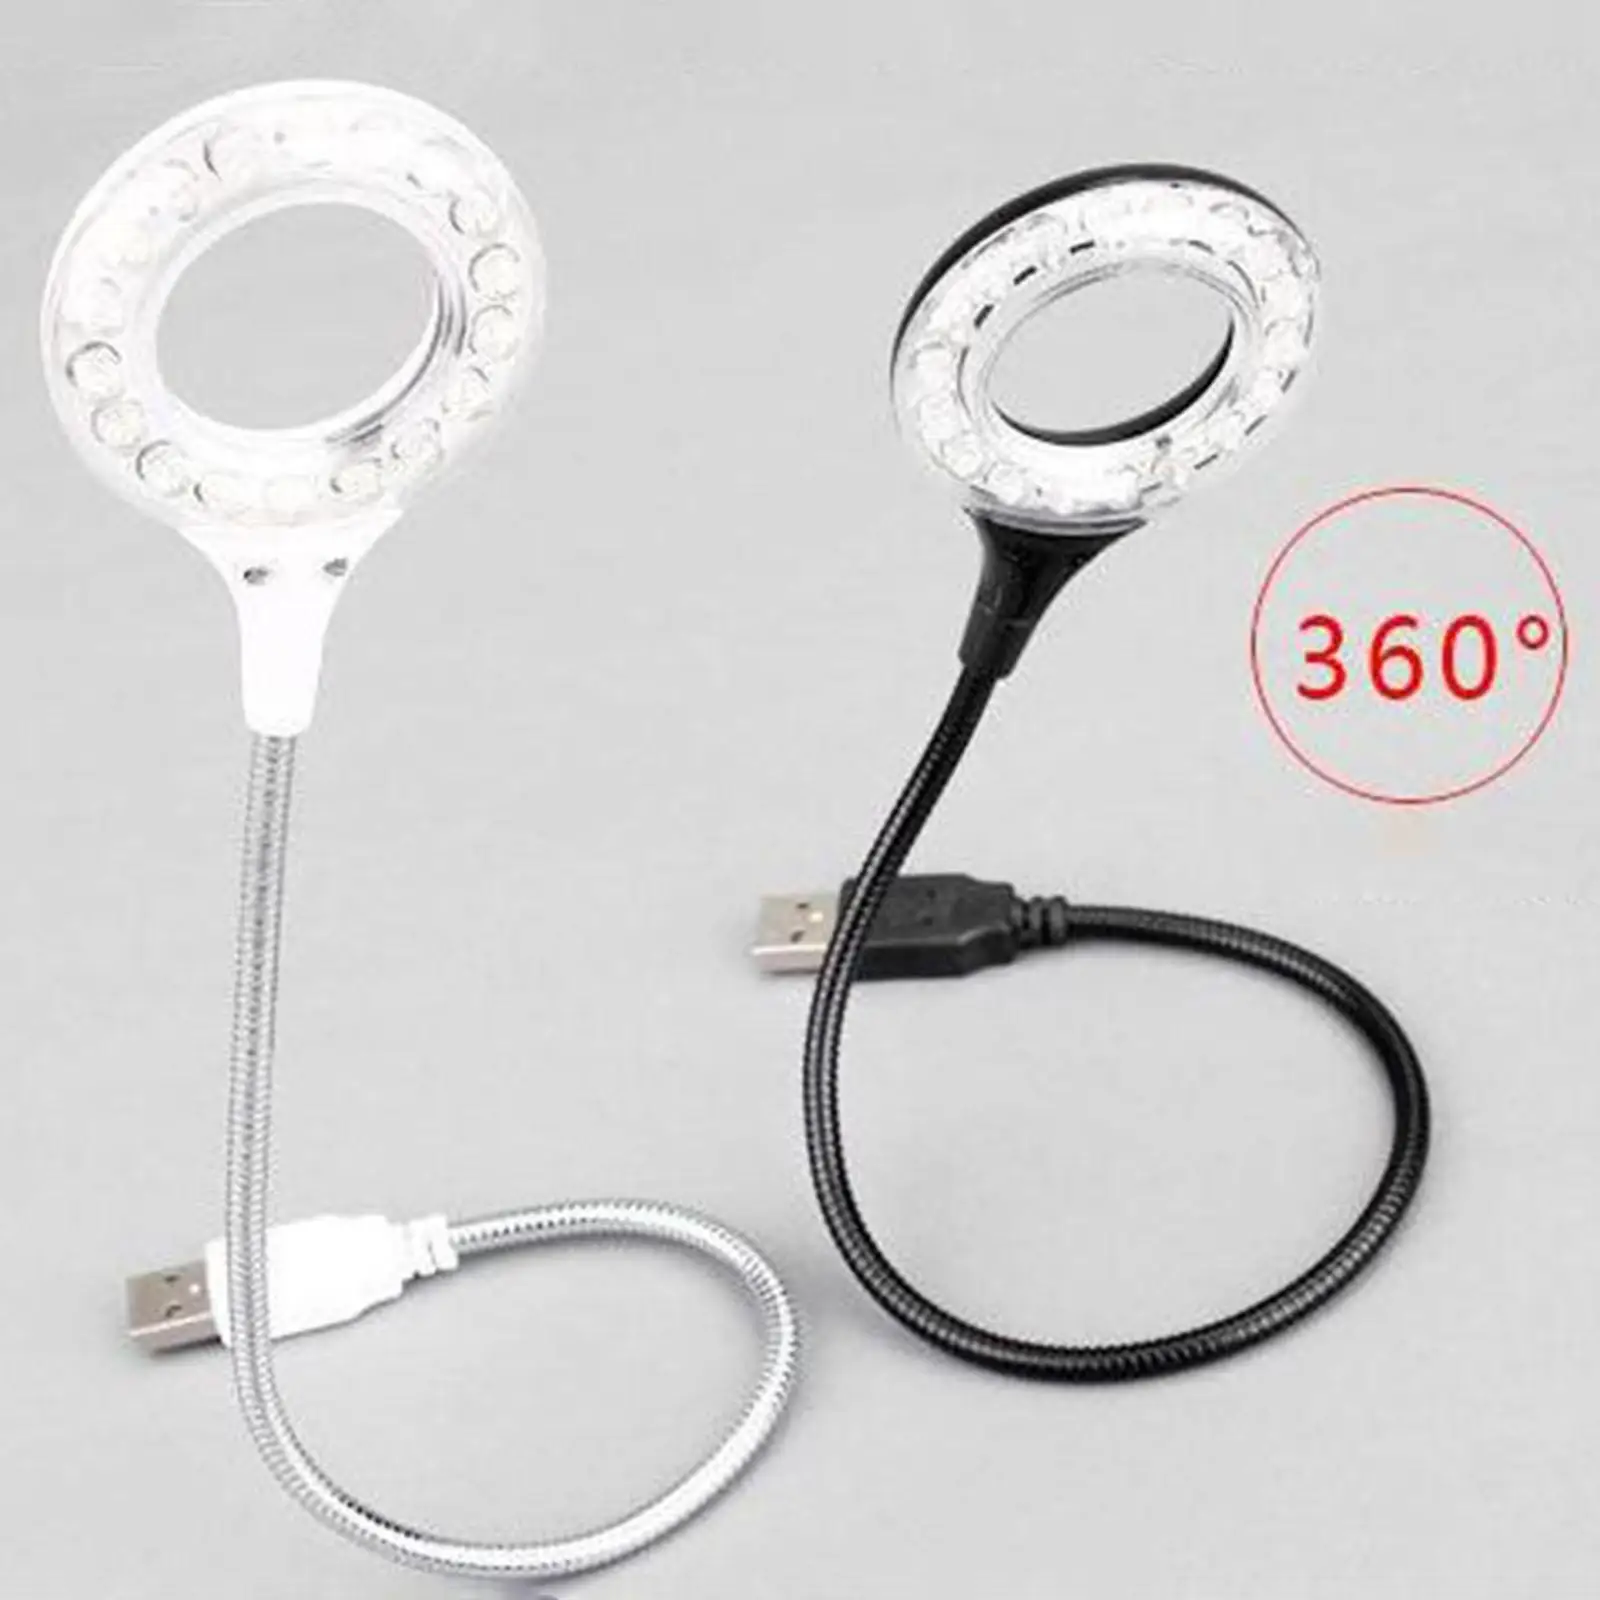 Folding LED USB Circular Light Freely Foldable Night Lamp, for Laptop and Computer Keyboard Adjustable Angle Table Desk Lamp,